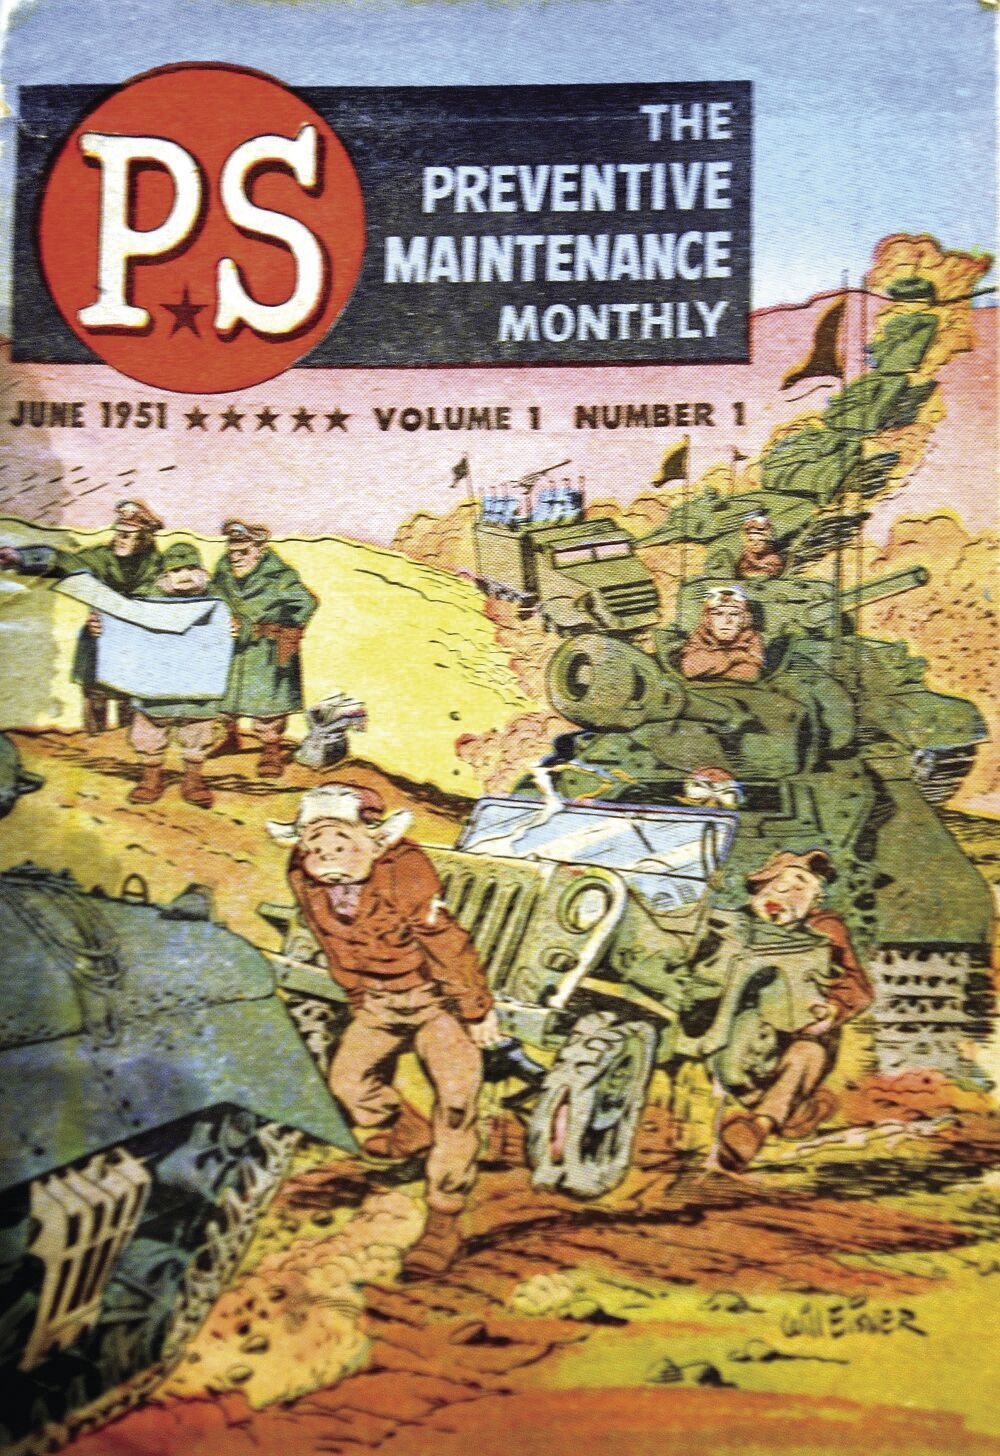 PS Magazine stays relevant at age 70